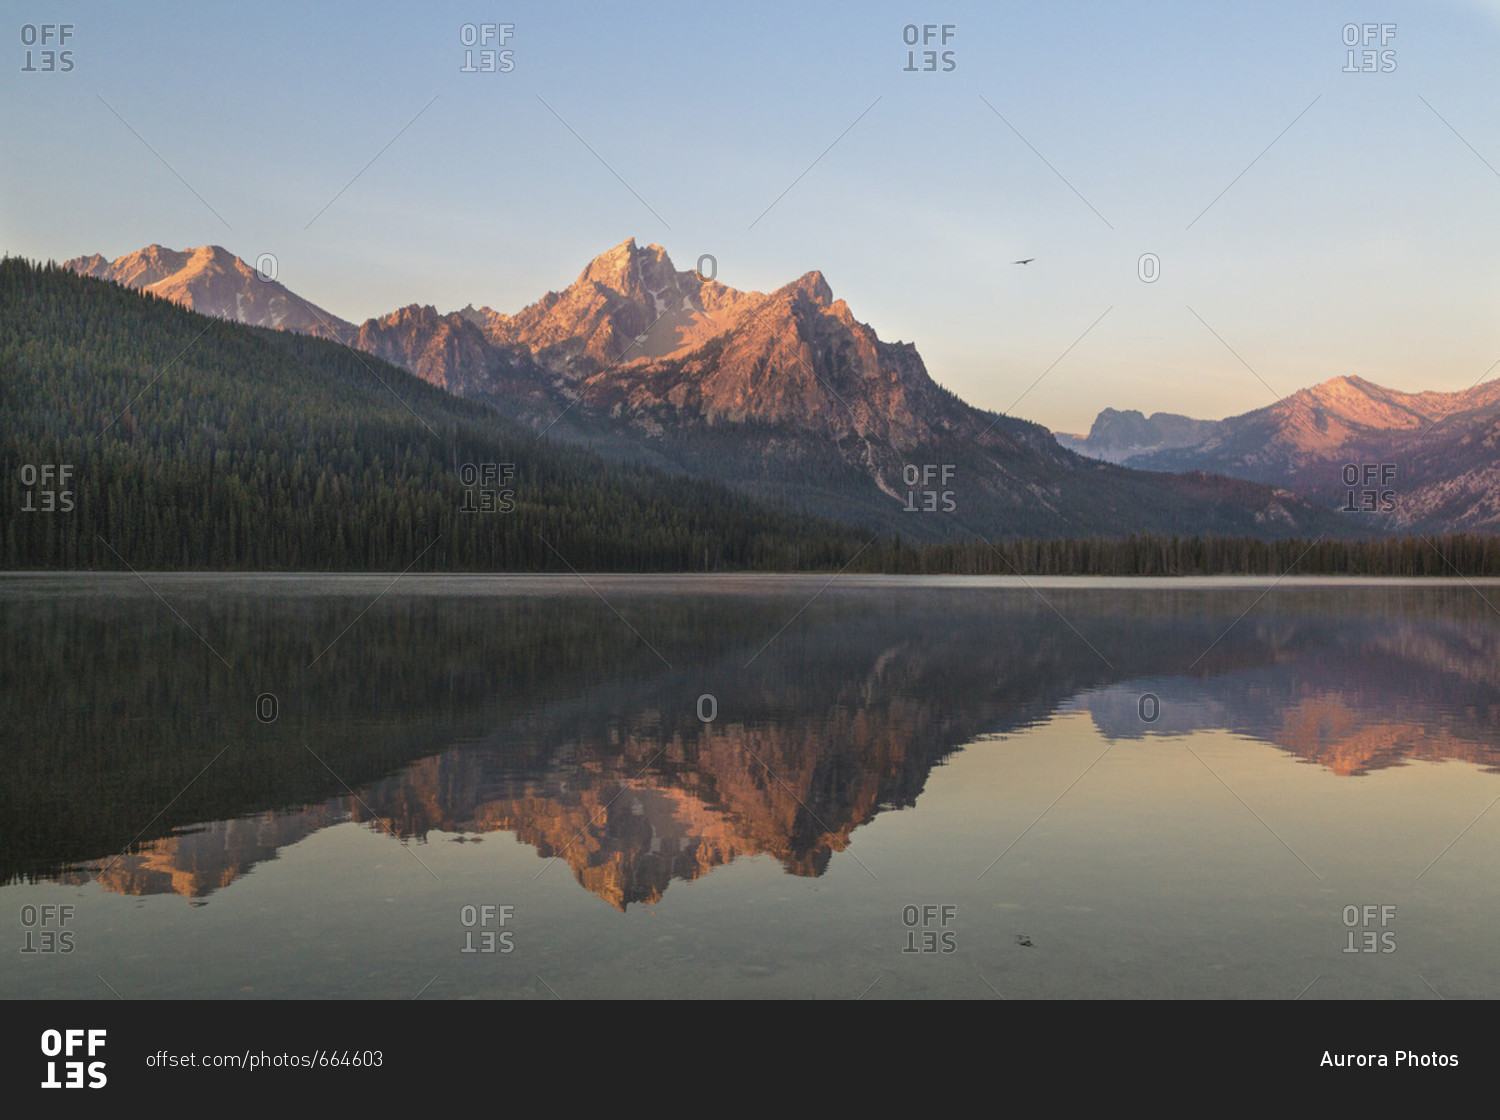 Mcgown Peak and Stanley Lake at sunrise, Sawtooth Wilderness, Sawtooth National Recreation Area, Stanley, Idaho, USA